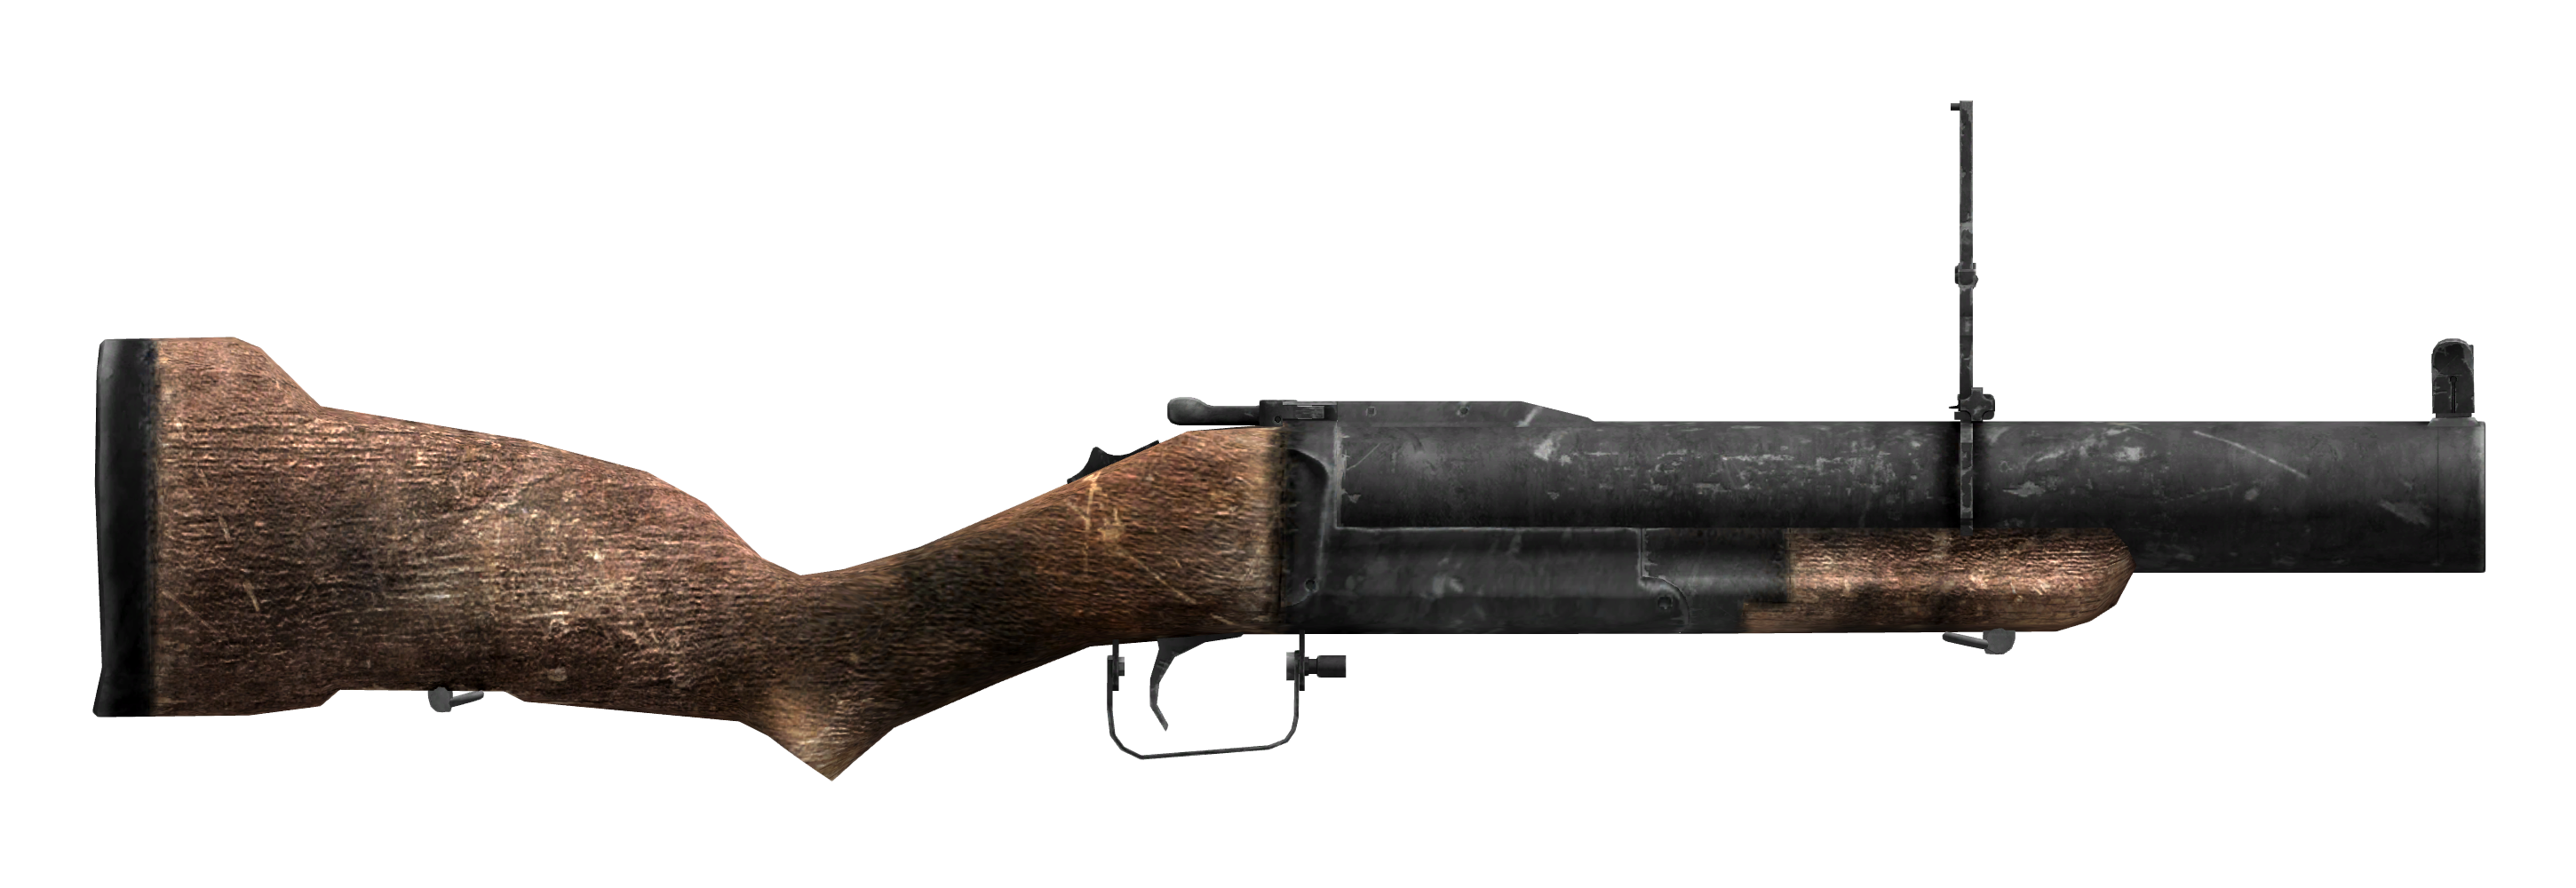 Lever action rifle (Fallout 76) - Independent Fallout Wiki